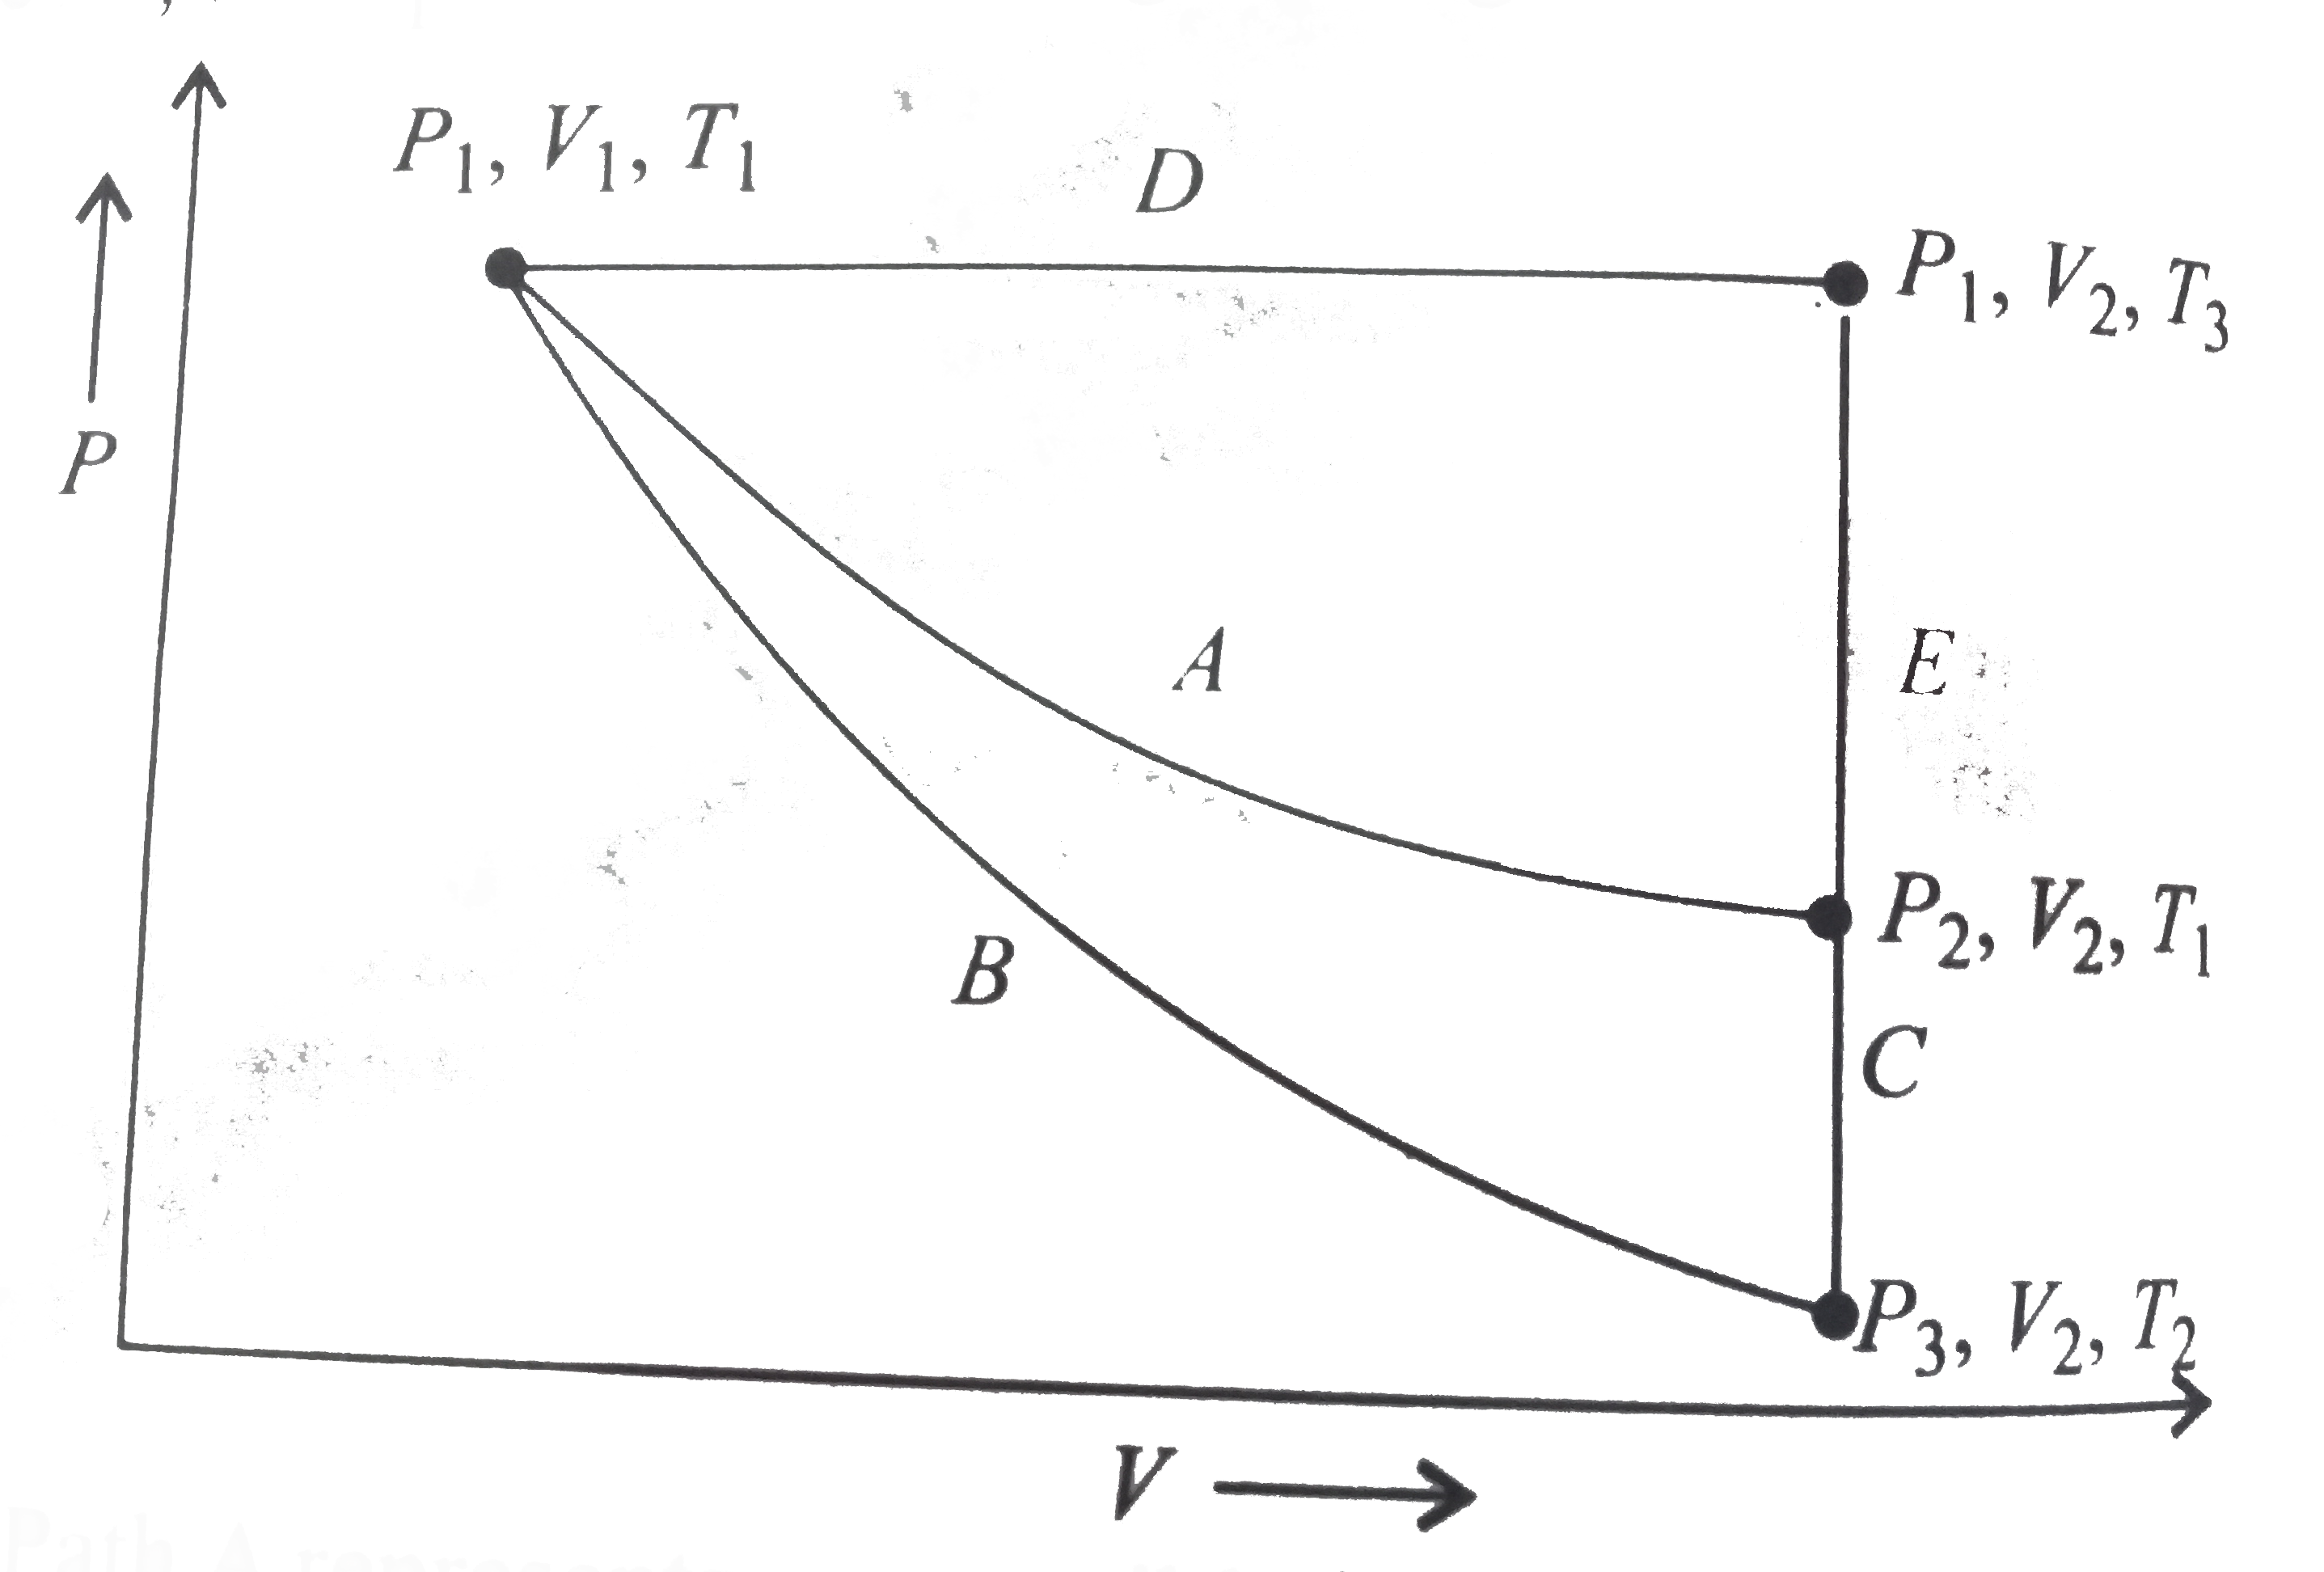 For an ideal gas, an illustratio of three different paths A(B+C) and (D+E) from an initial state P(1), V(1), T(1) to a final state P(2), V(2),T(1) is shown in the given figure.      Path Arepresents a reversible isothermal expansion form P(1),V(1) to P(2),V(2), Path (B+C) represents a reversible adiabatic expansion (B) from P(1),V(1),T(1)to P(3),V(2),T(2) followed by reversible heating the gas at constant volume (C)from P(3),V(2),T(2) to P(2),V(2),T(1). Path (D+E) represents a reversible expansion at constant pressure P(1)(D) from P(1),V(1),T(1) to P(1),V(2),T(3) followed  by a reversible cooling at constant volume V(2)(E) from P(1),V(2),T(3) to P(2),V(2),T(1).    What is q(rev), for path (A)?